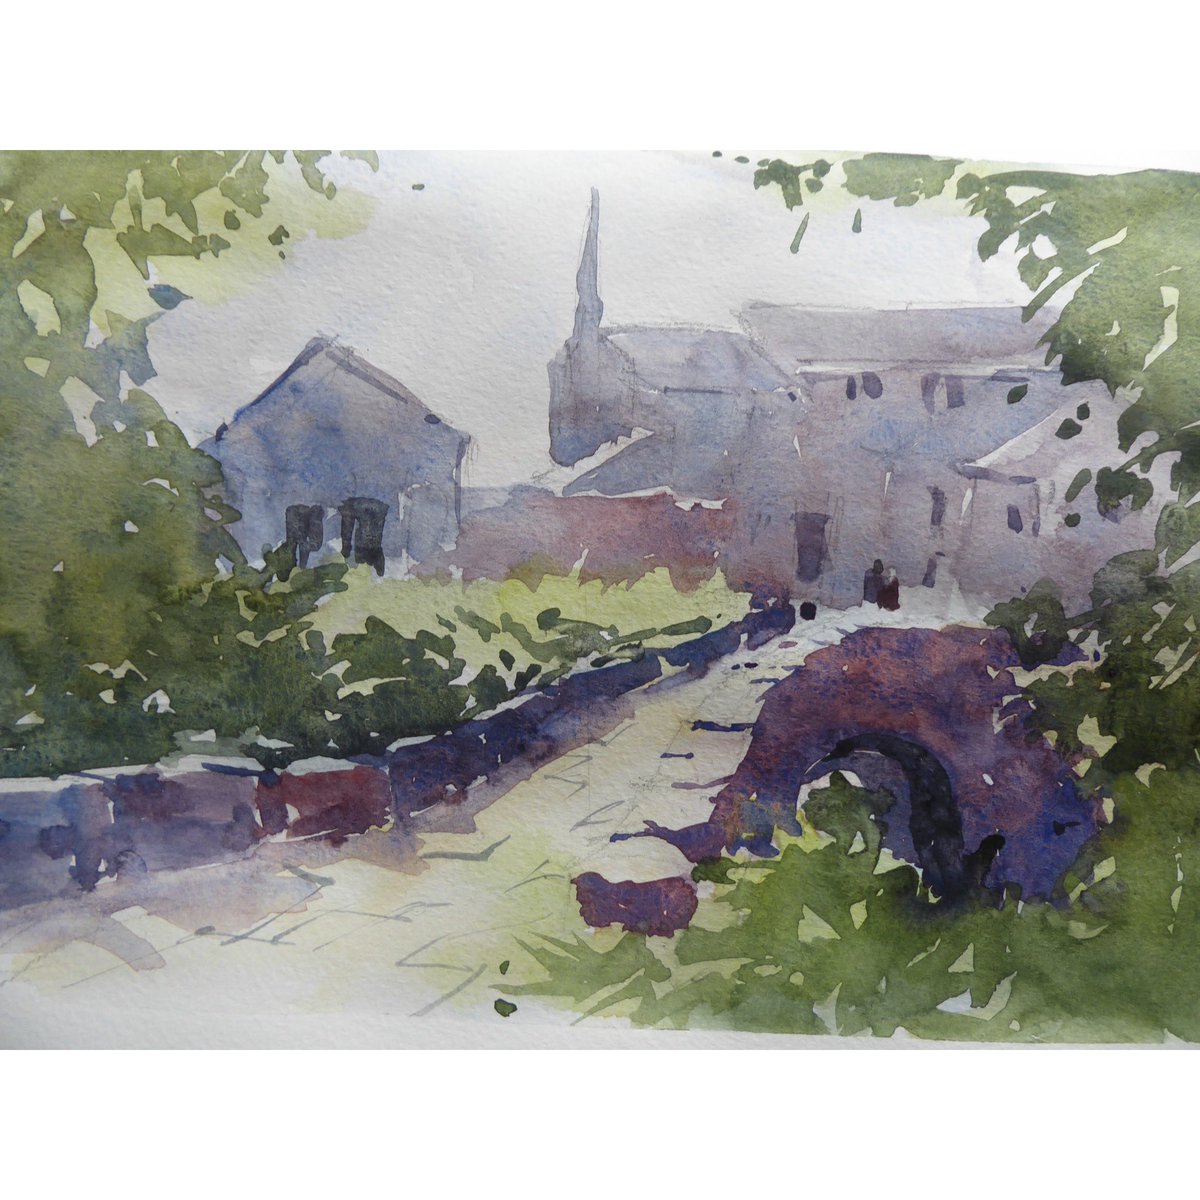 The Sussex Watercolour Society annual exhibition at the Linklater Lewes 10th-12th September (Friday 1.30-5 Saturday and Sunday 10-5) #sussexwatercoloursociety #watercolourartists #watercolour #sussex #watercolourpainting  #watercolourpainters #sussexartists #sussexpainters